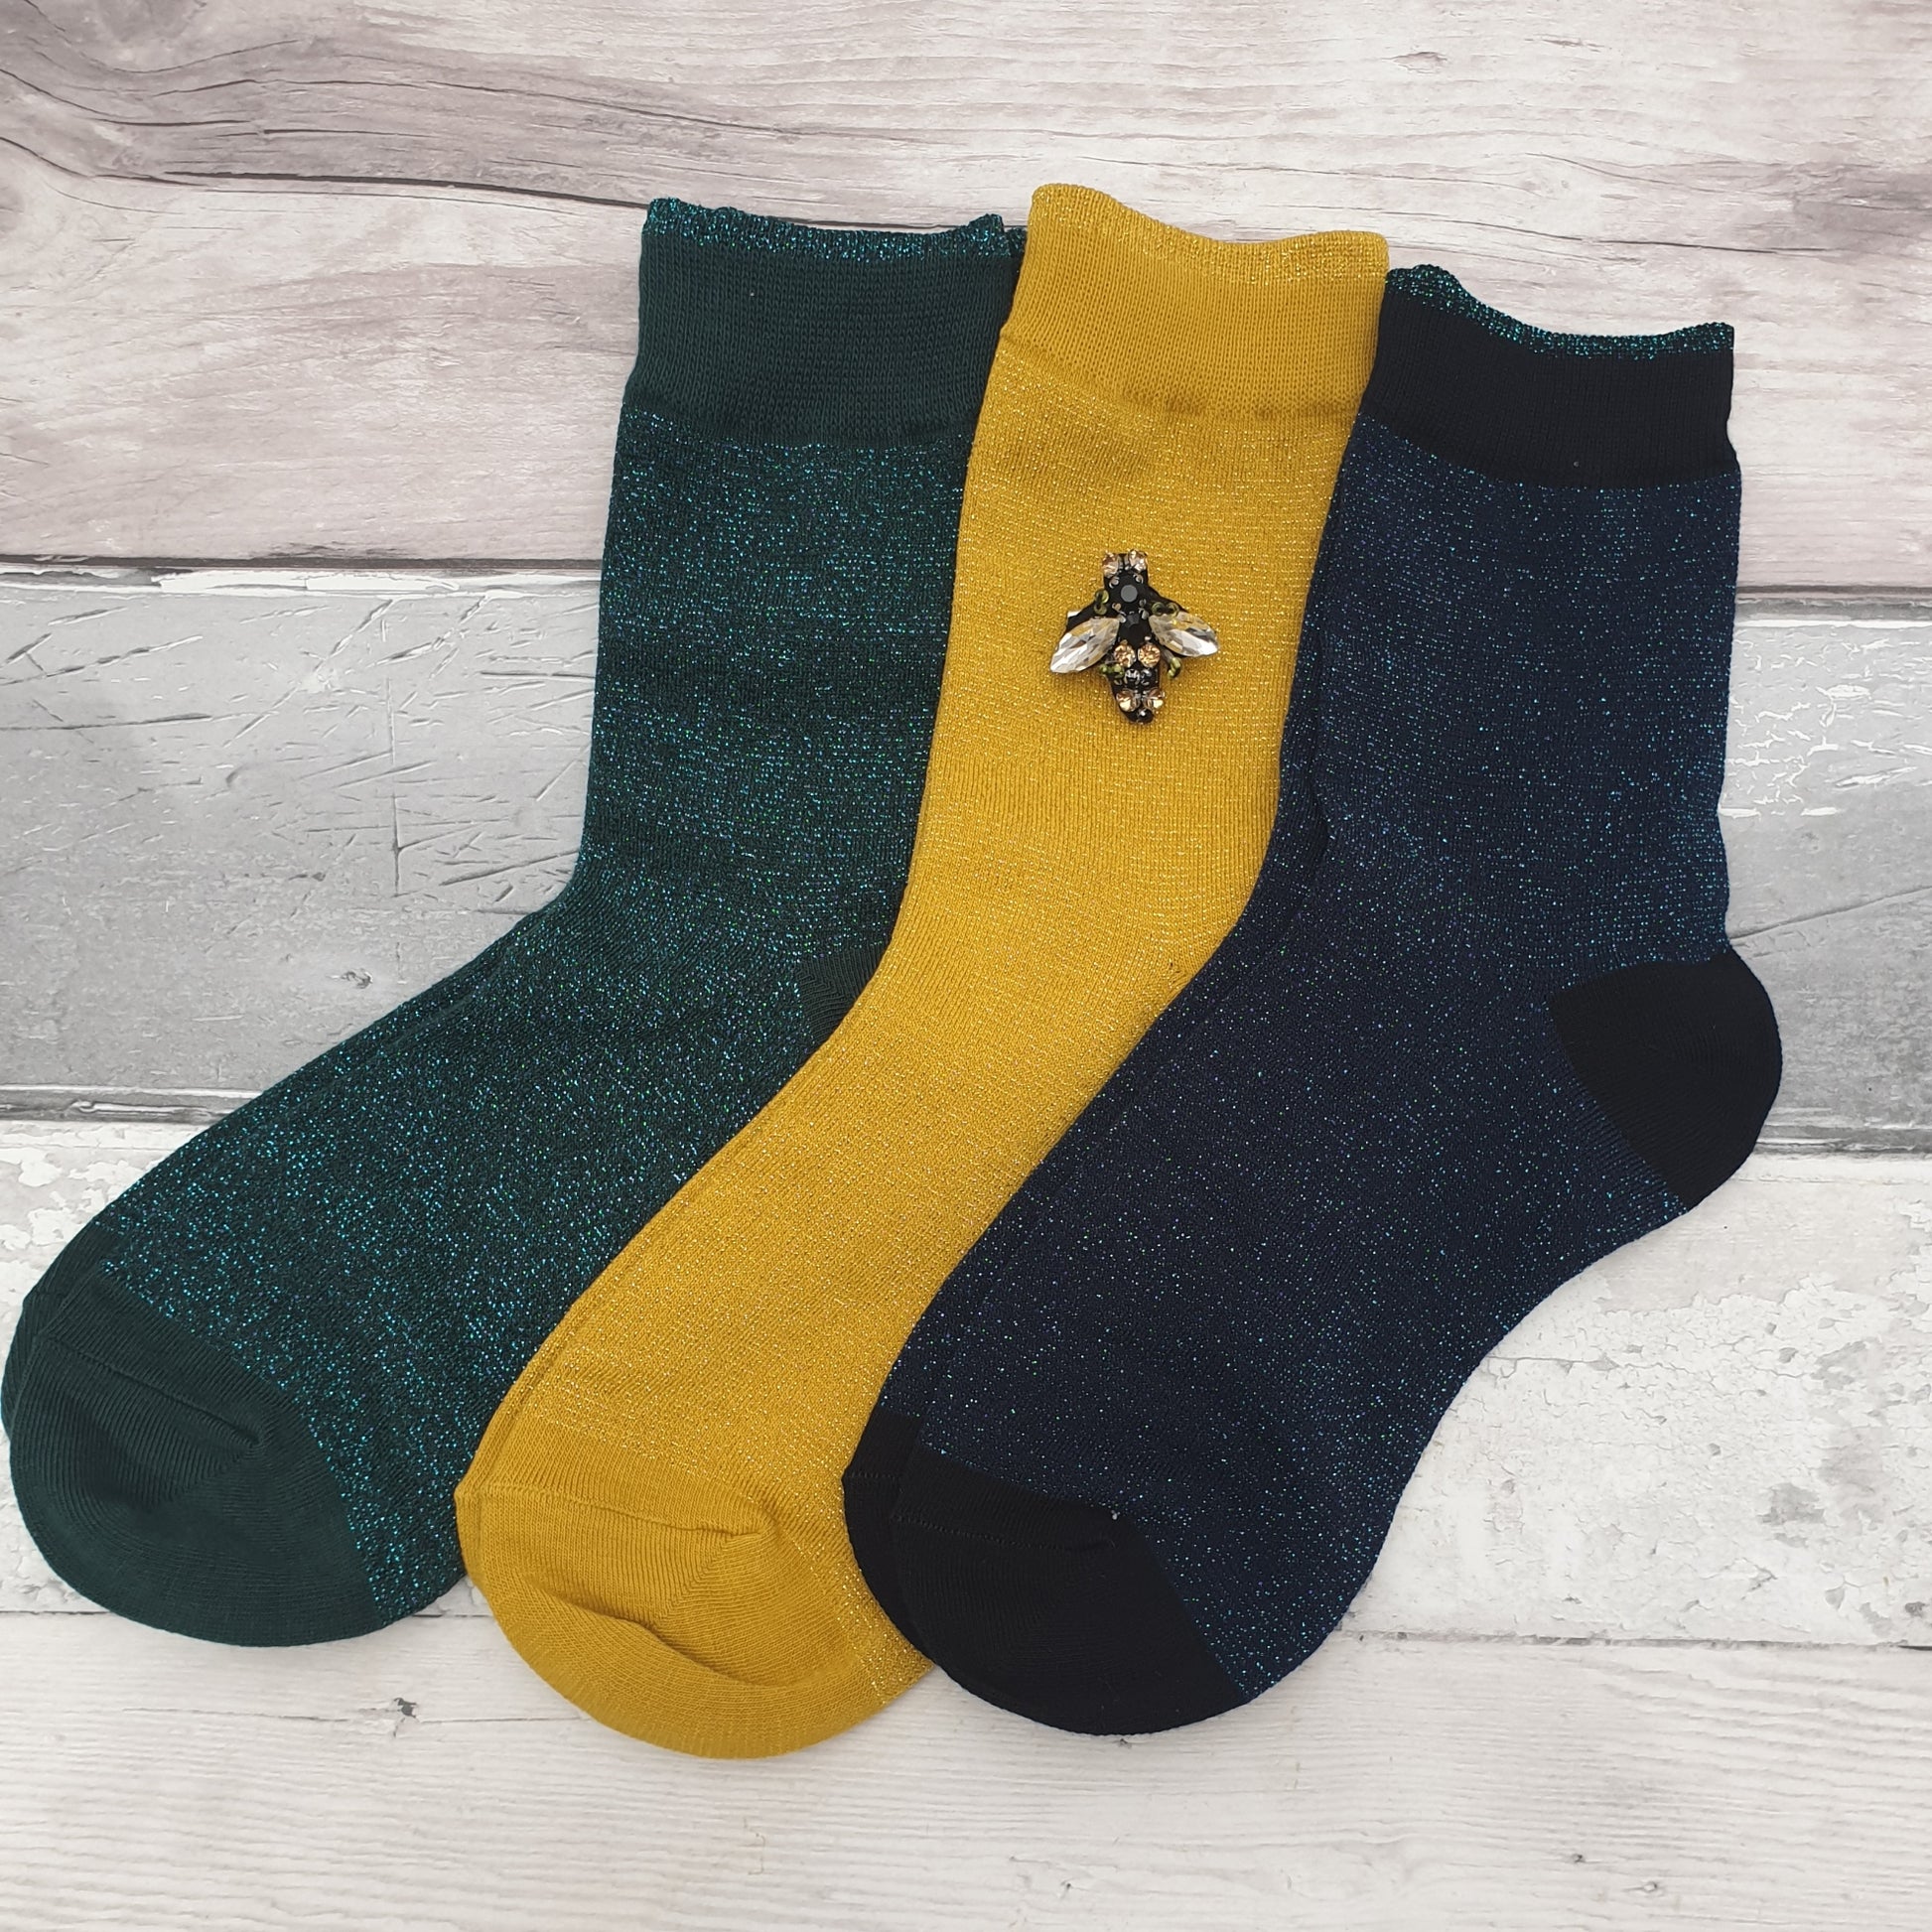 Teal, Yellow and Midnight (navy) coloured sparkly socks with a Bee Brooch made from recycled glass.